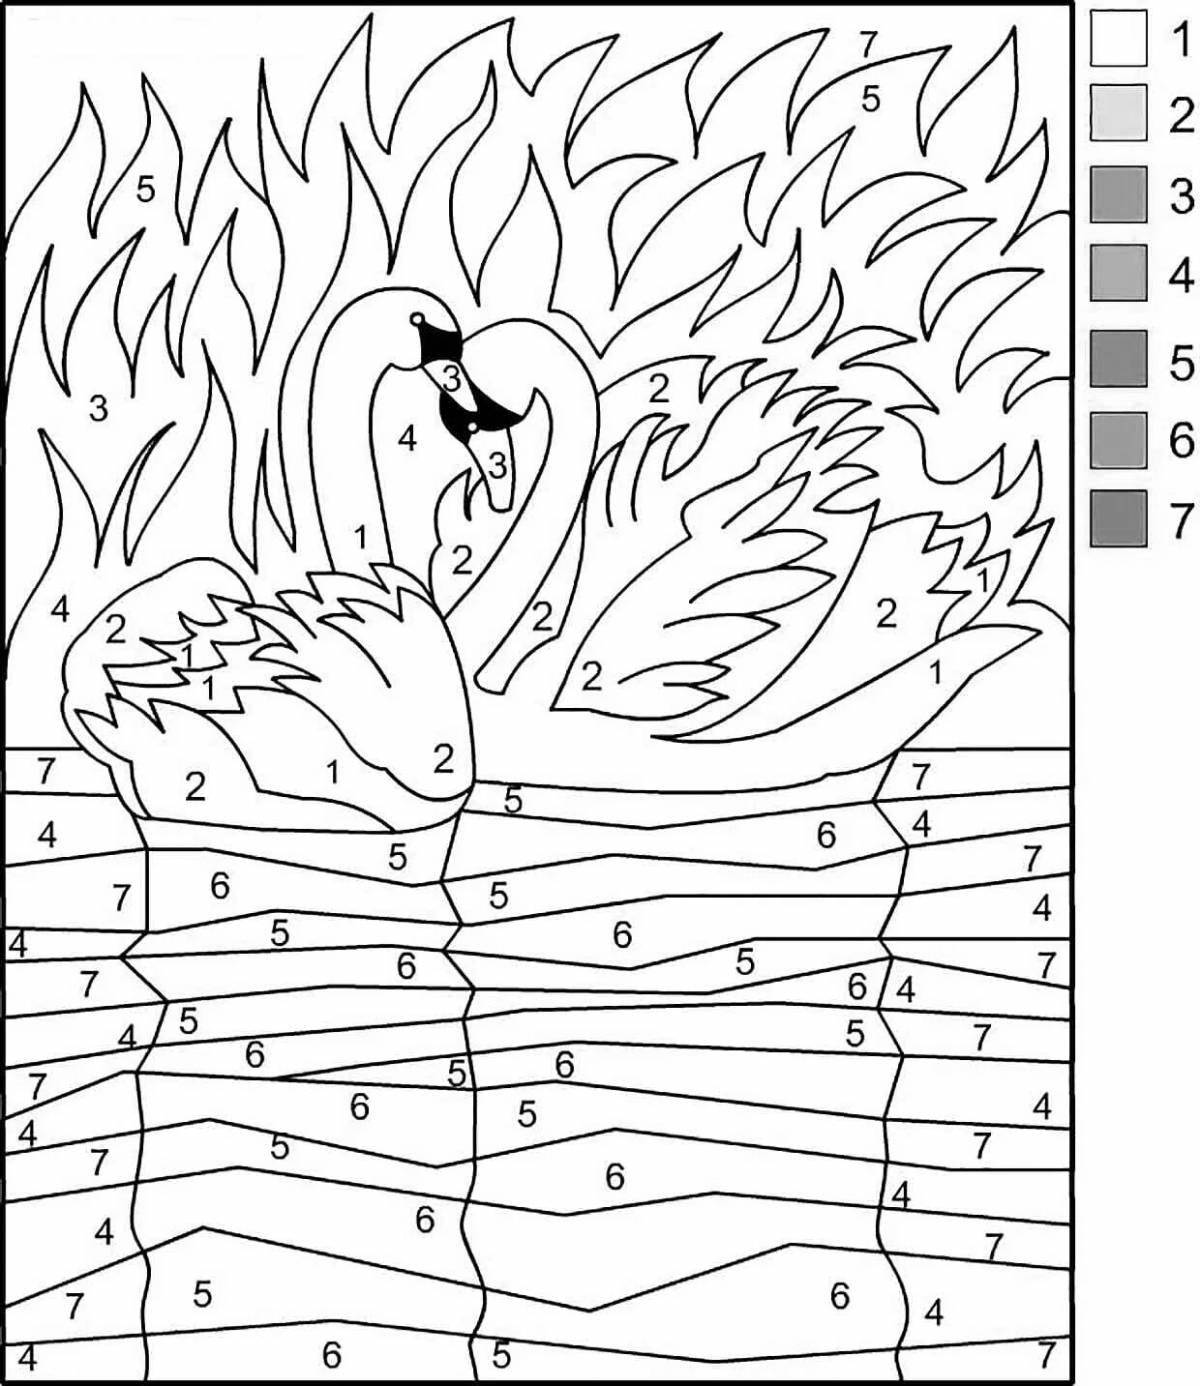 Charming easy-by-numbers coloring book